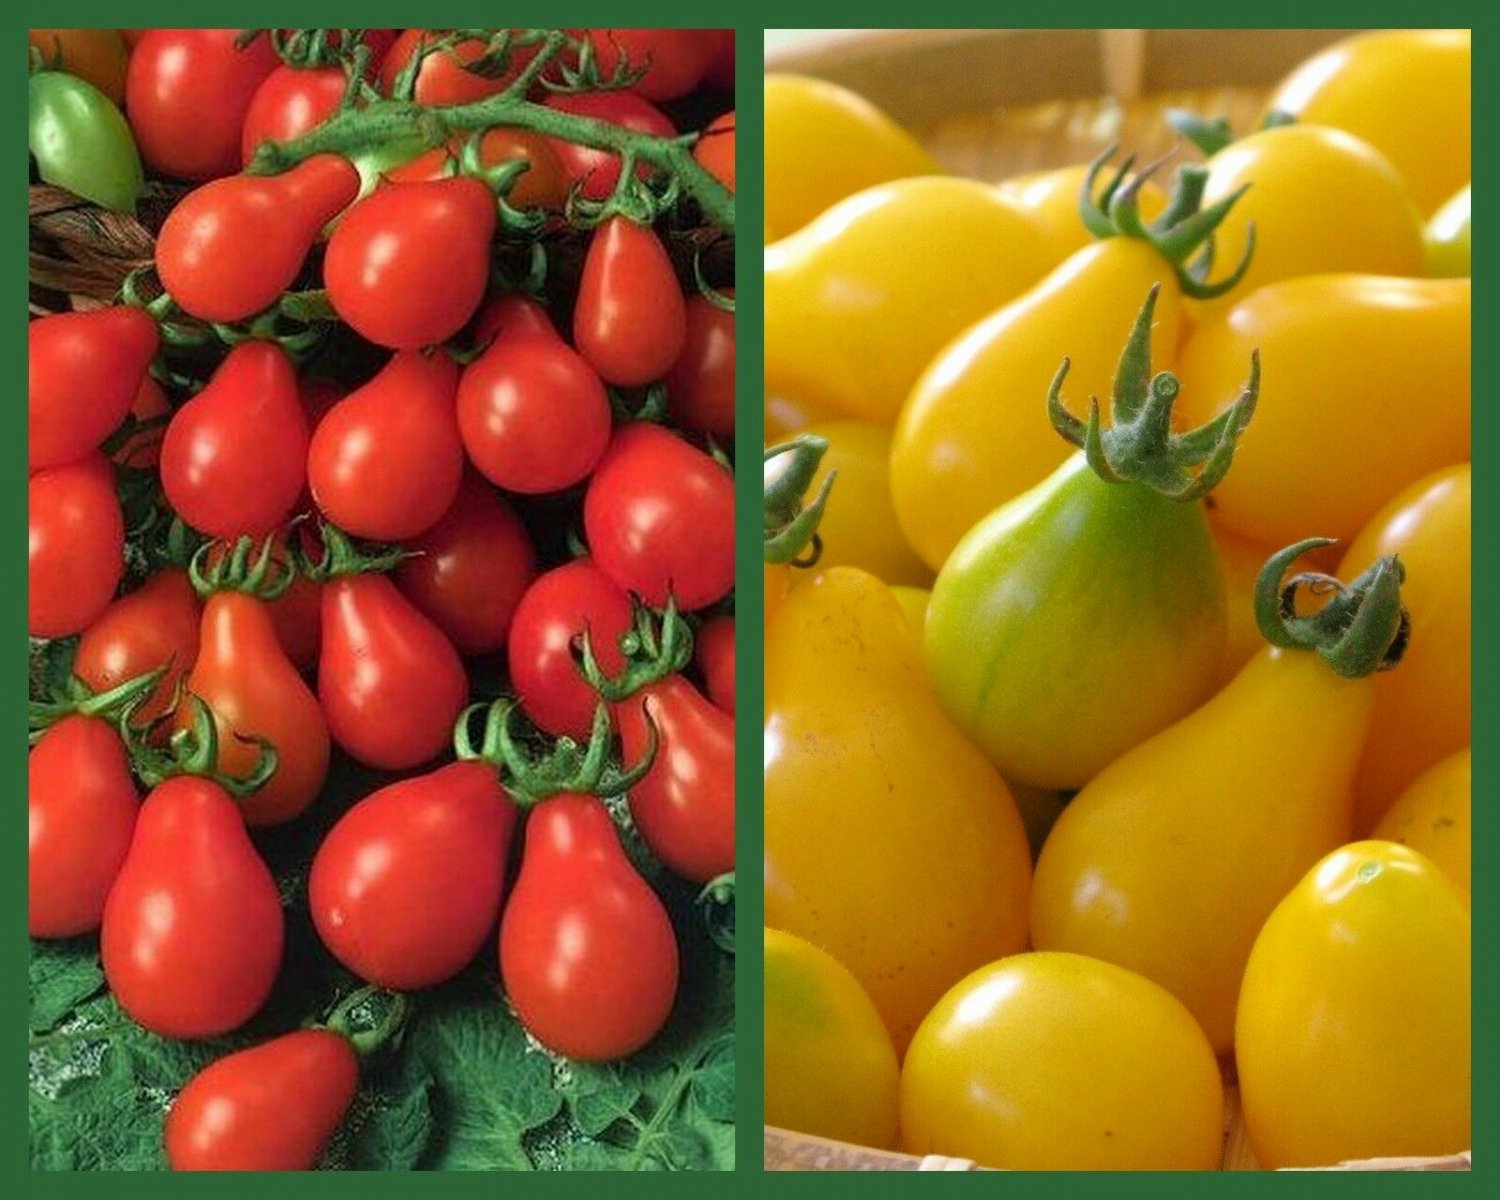 Yellow Pear "Perfect Pear Tomatoes" 2 pk Special Red Heirloom Pear Tomatoes 